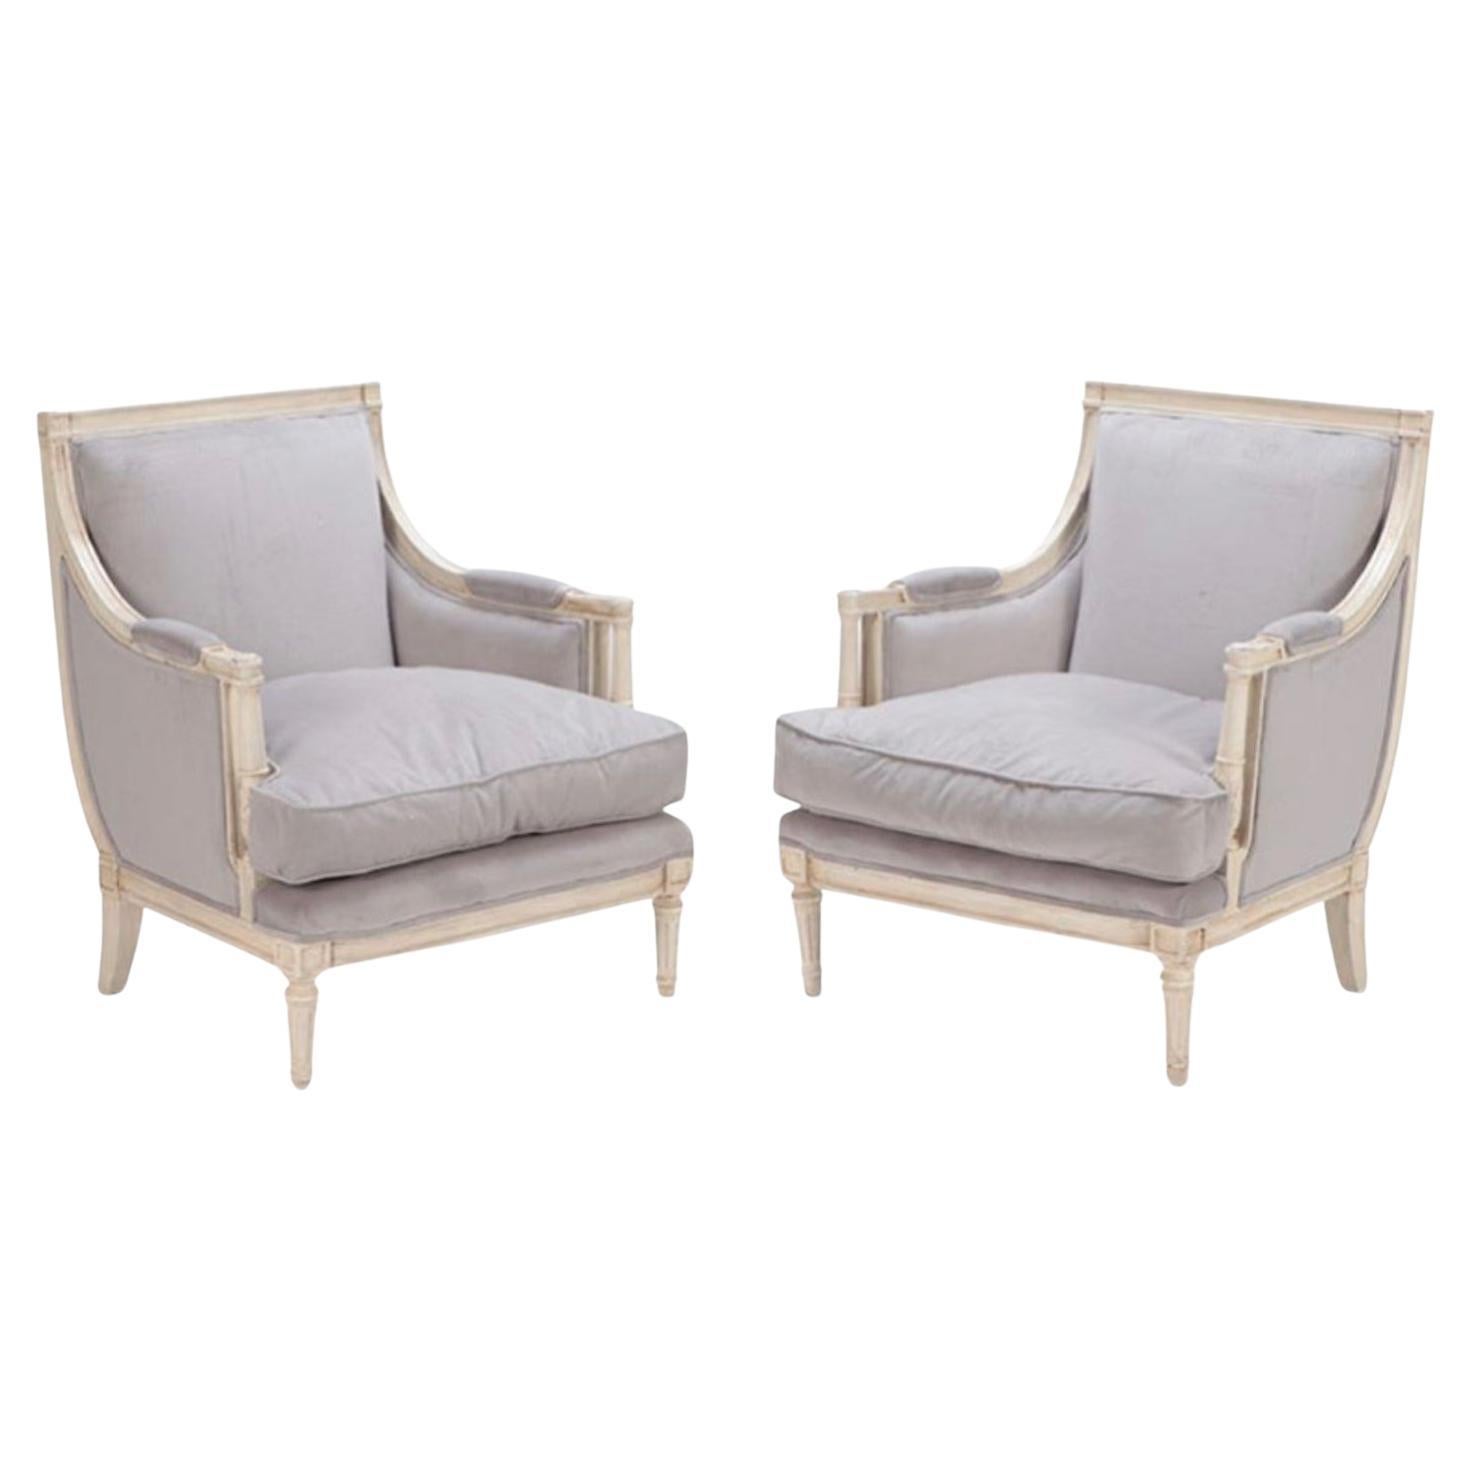 Pair of Mid-20th Century Louis XVI Berger Chairs Newly Upholstered